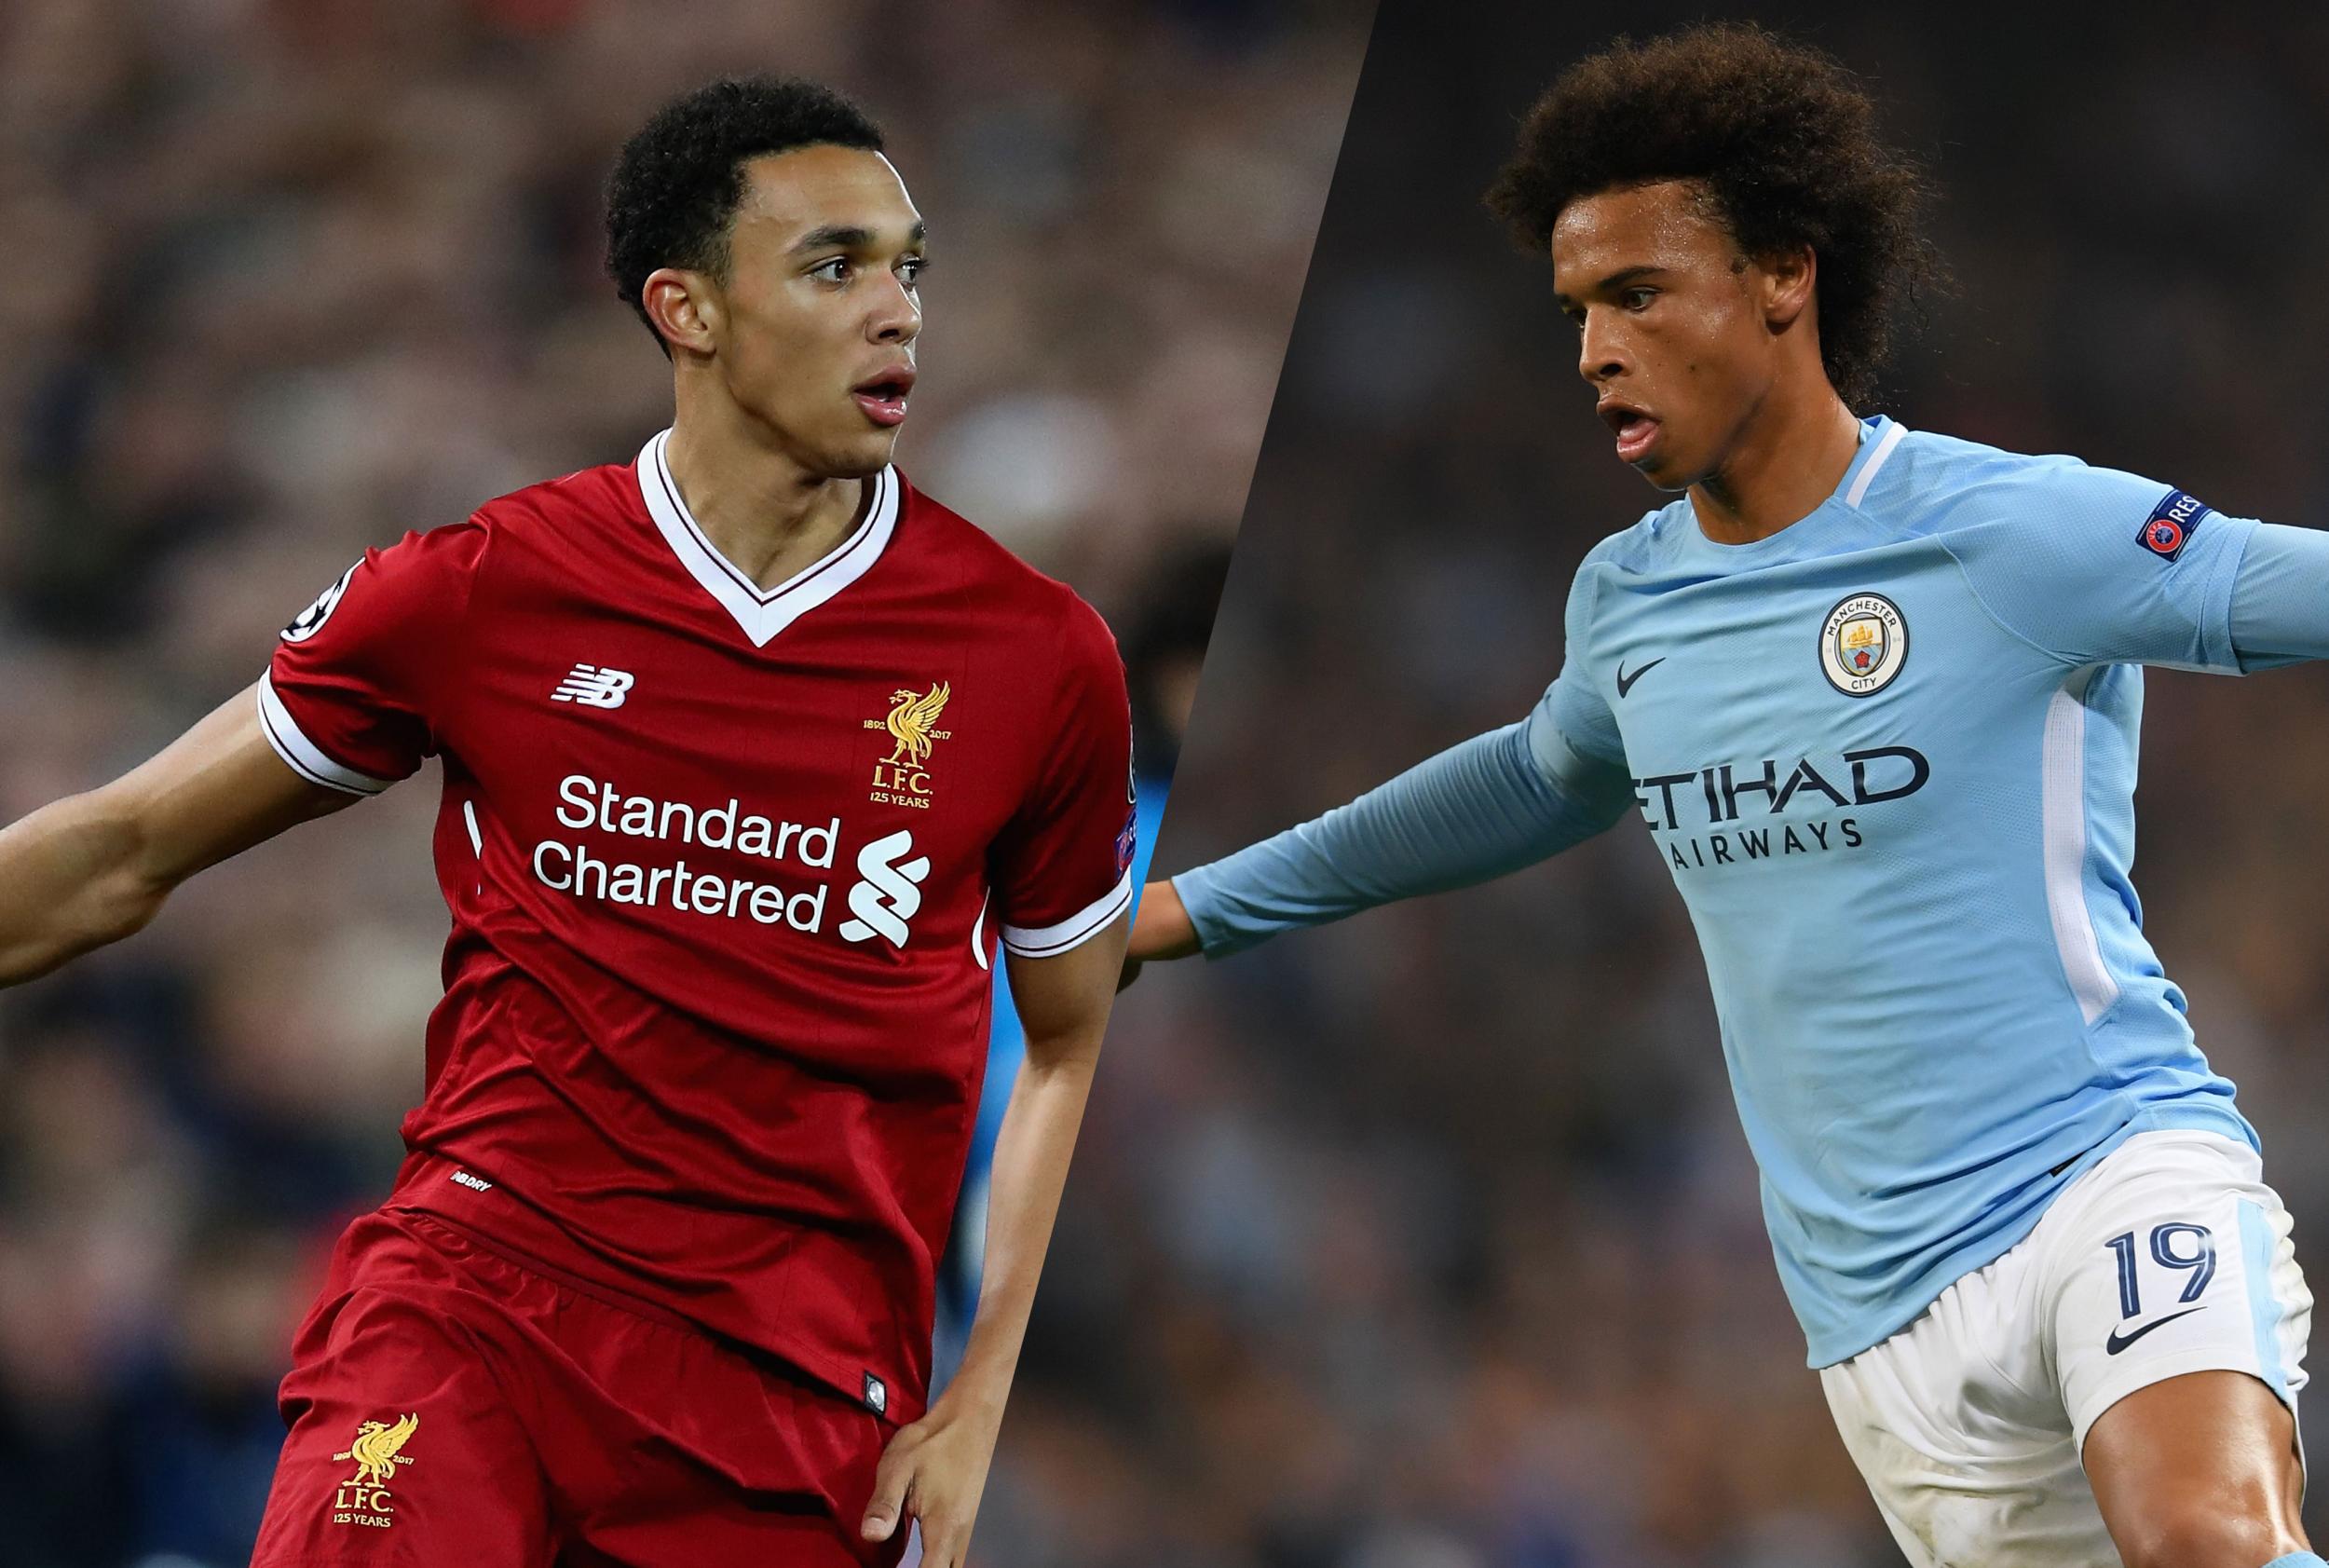 Trent Alexander-Arnold will be up against Leroy Sané on Liverpool's right flank